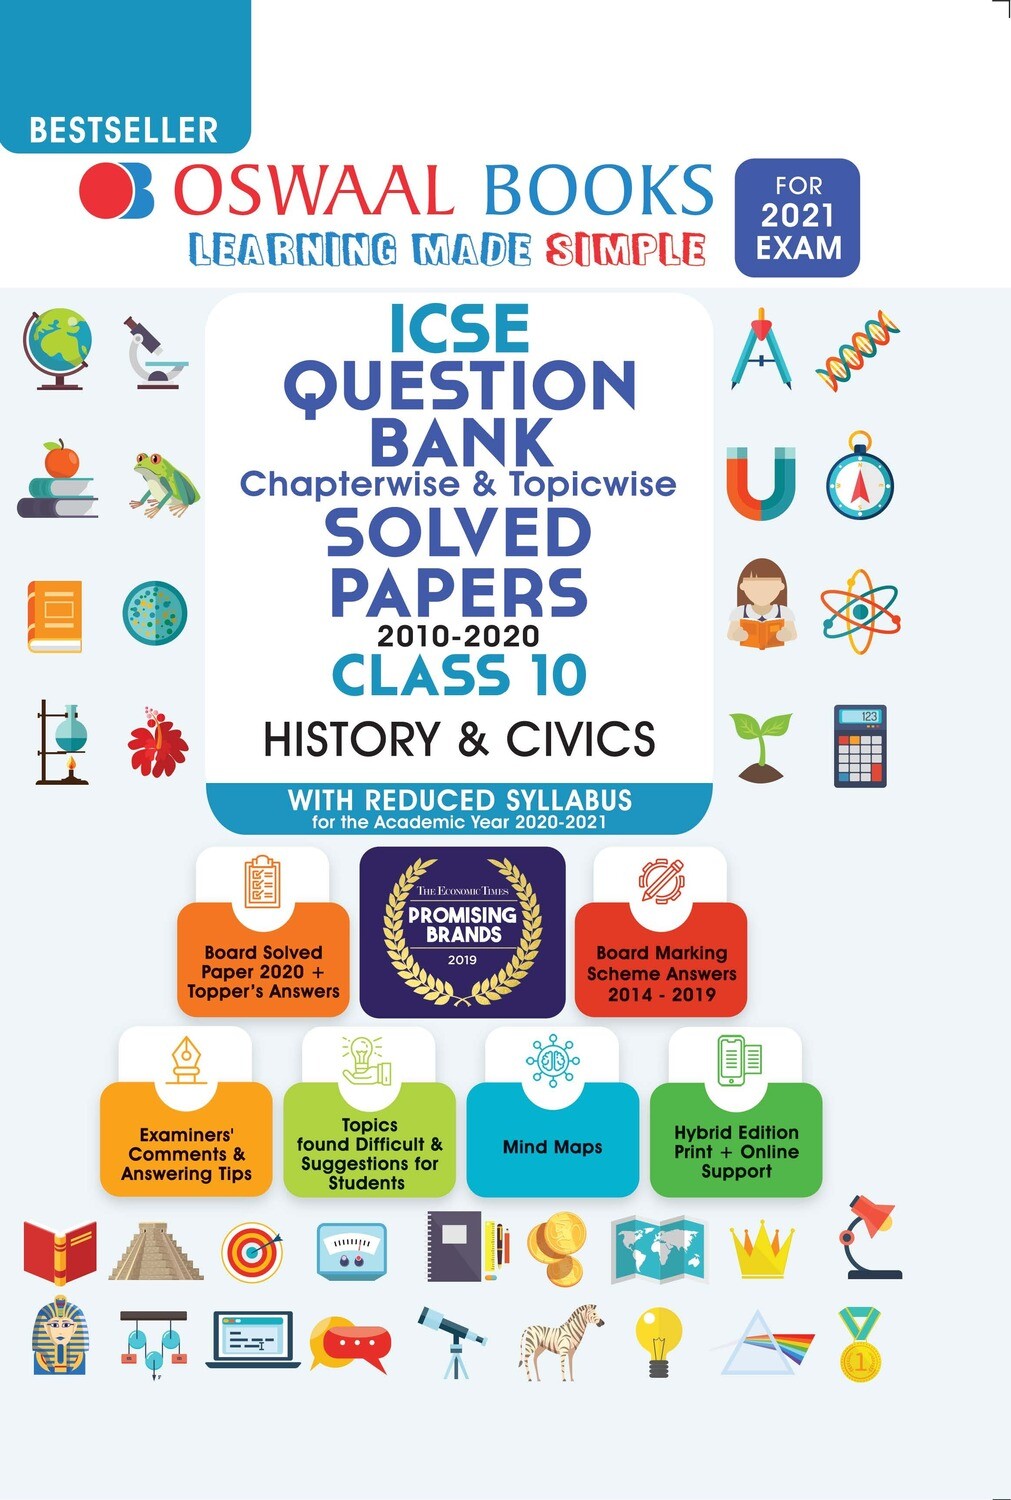 Buy e-book: Oswaal ICSE Question Bank Chapterwise & Topicwise Solved Papers, History & Civics, Class 10 (Reduced